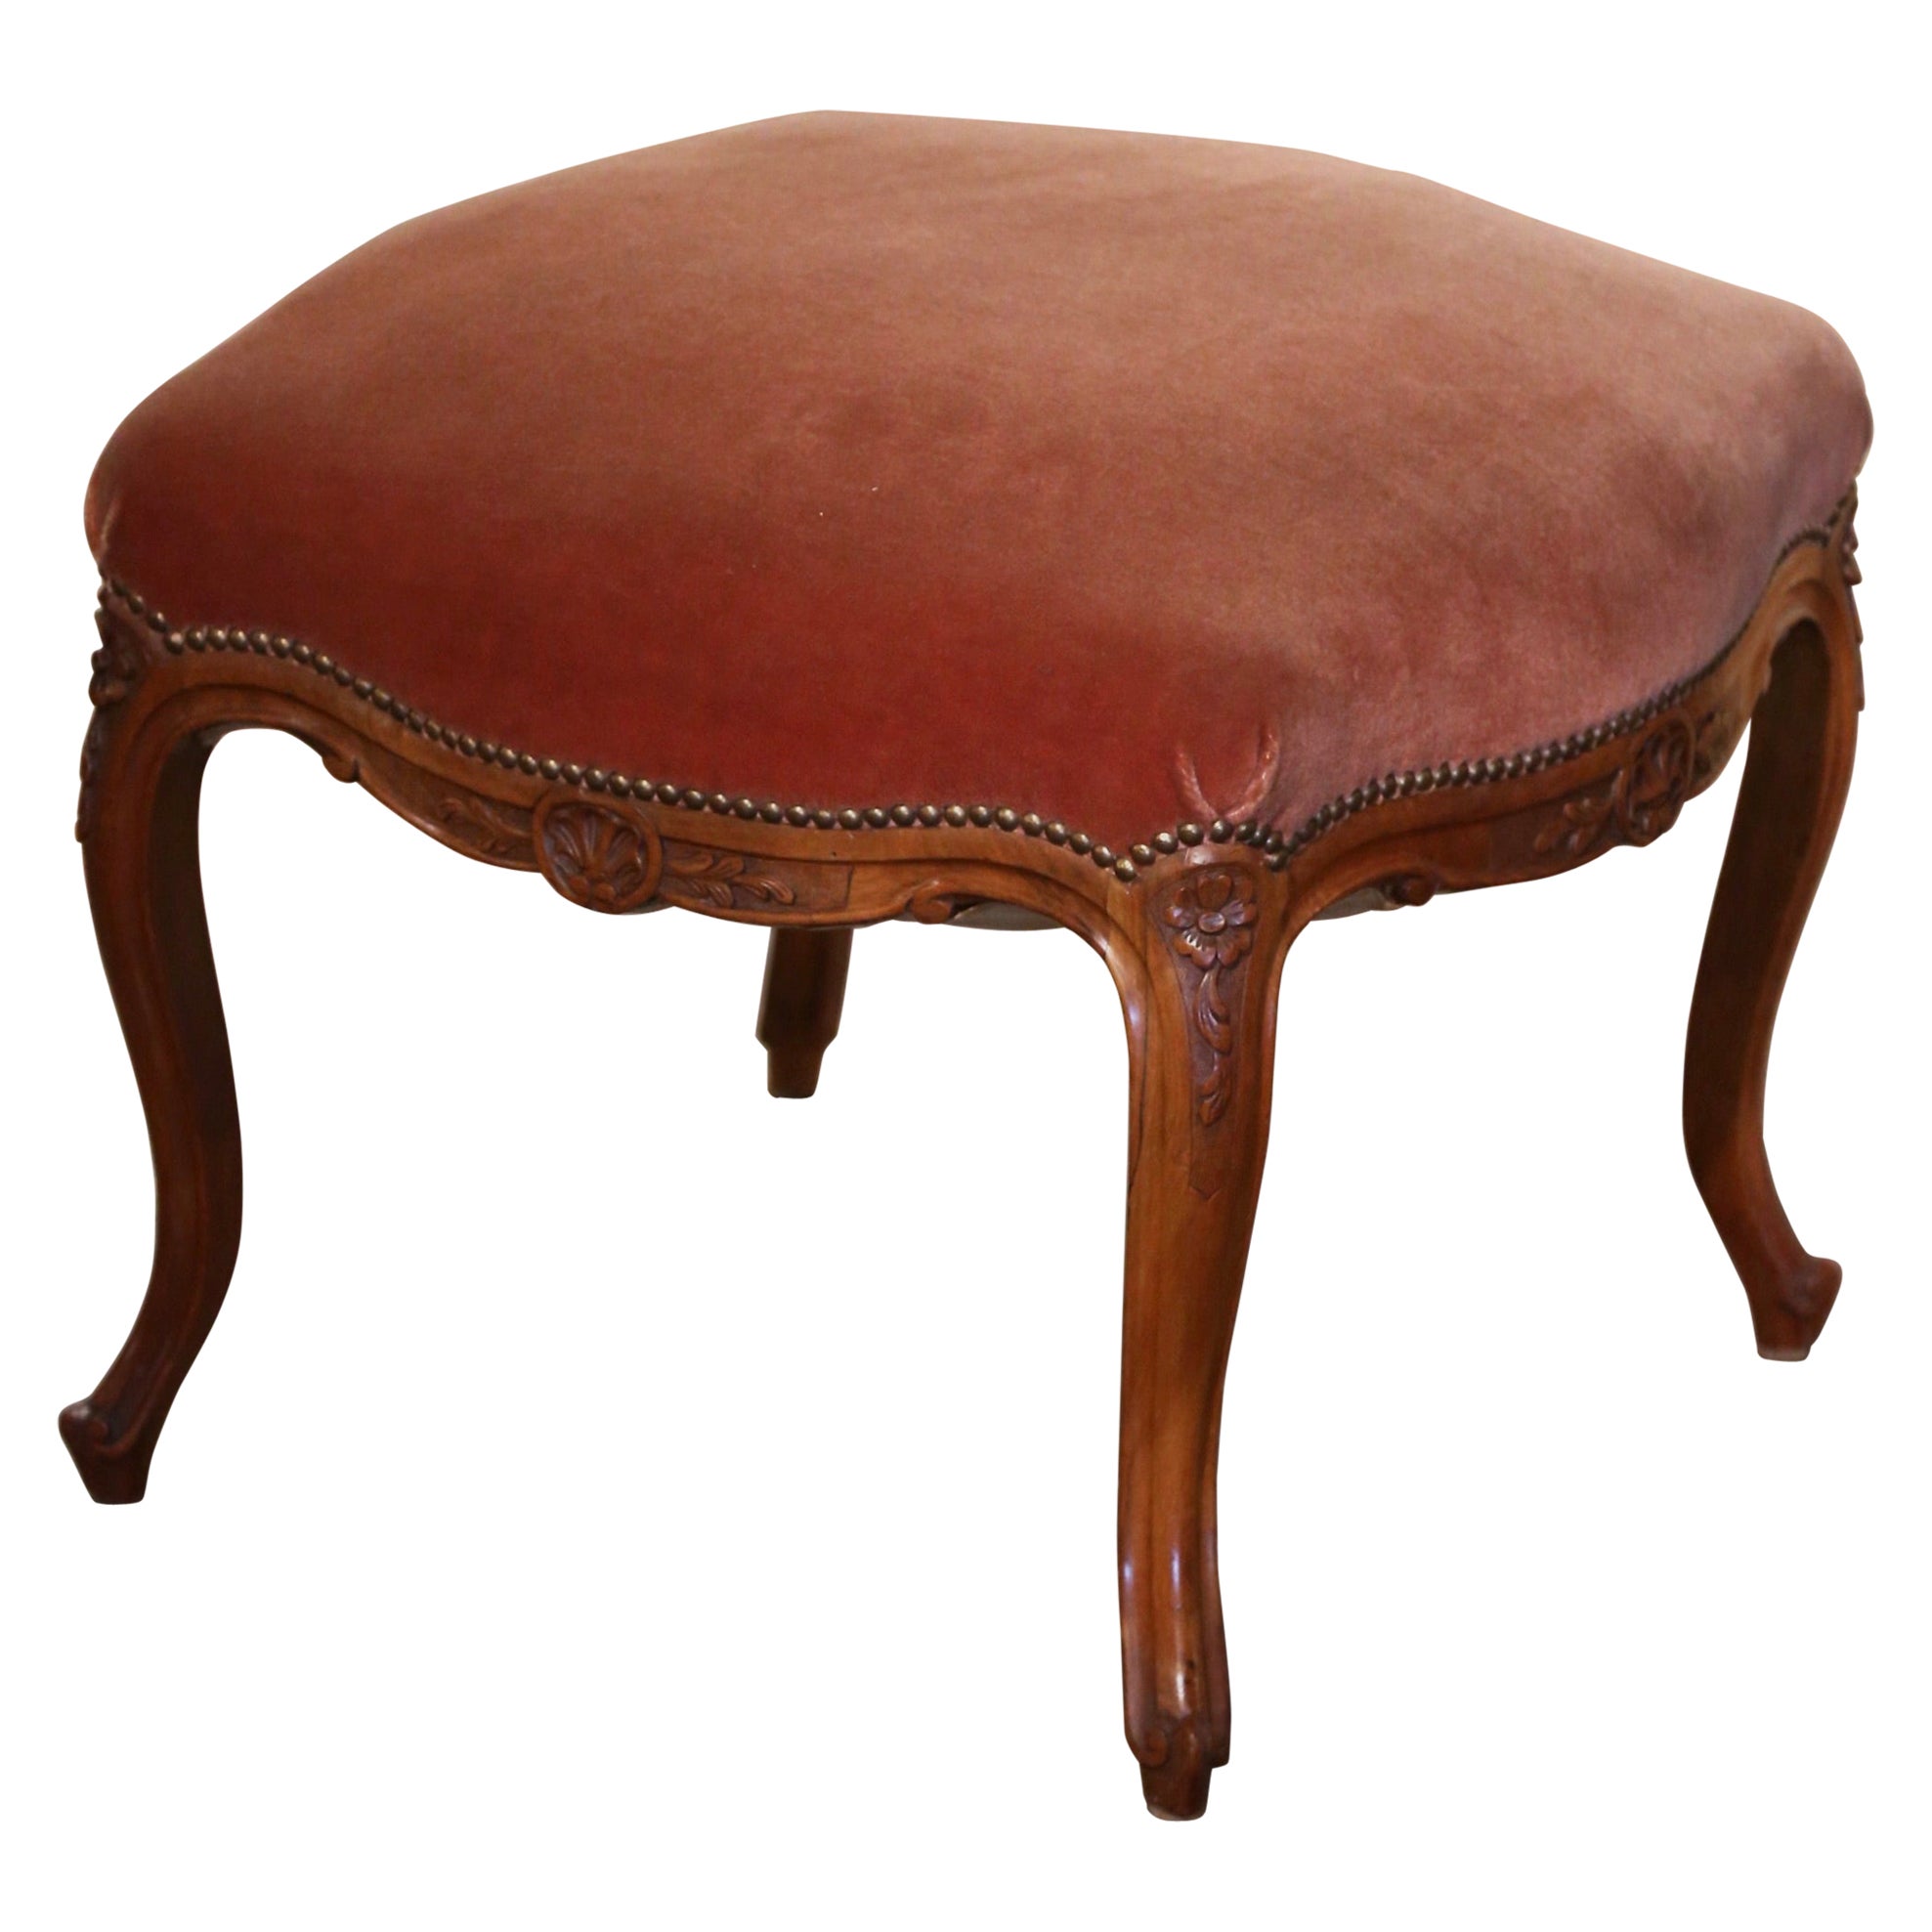 Early 20th Century French Louis XV Carved Walnut & Velvet Stool from Provence